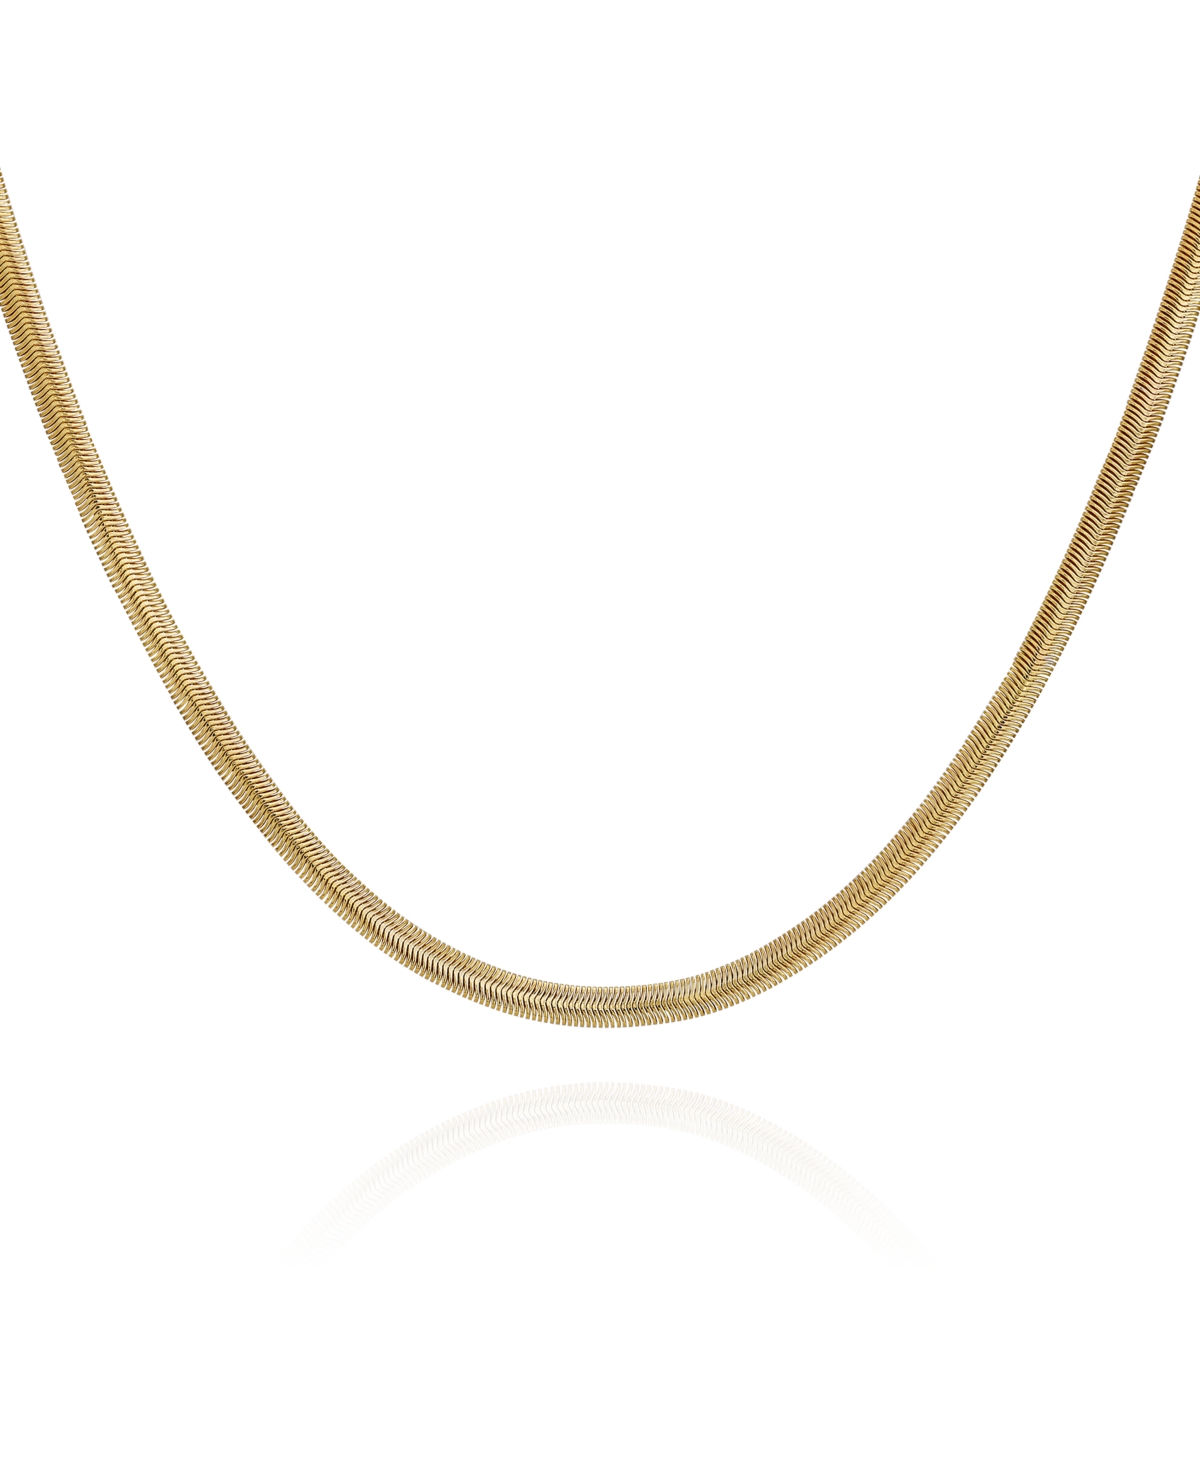 Vince Camuto Gold-tone Classic Snake Chain Necklace, 18" + 2" Extender